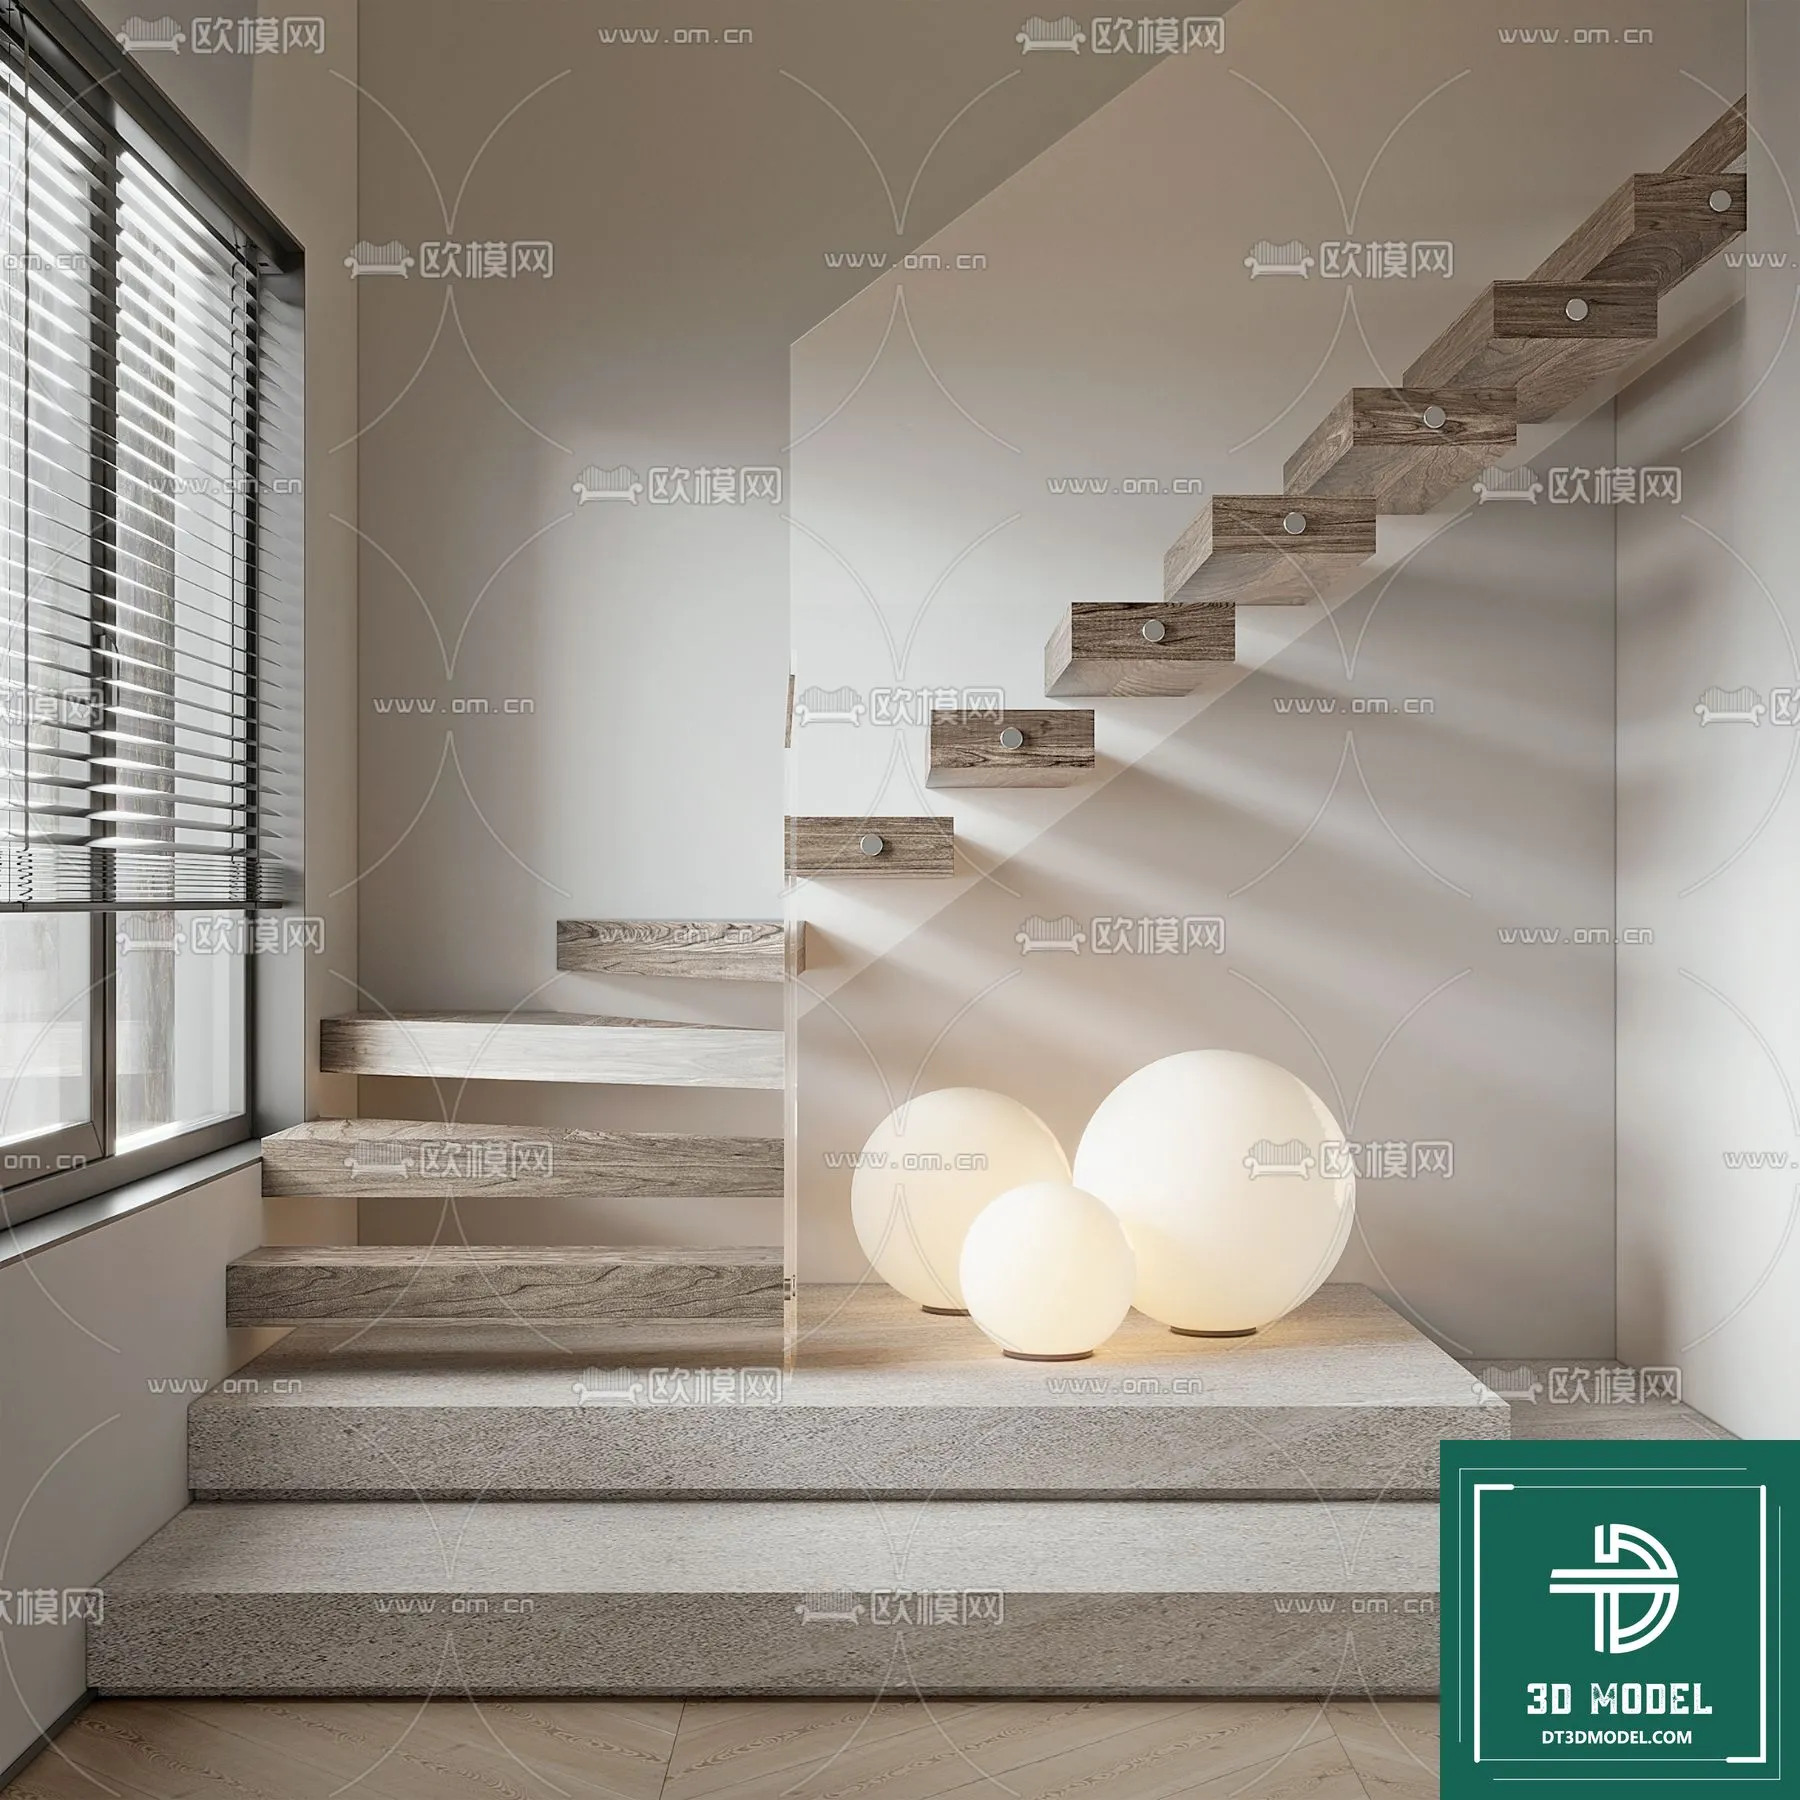 STAIR – 3DS MAX MODELS – 080 – PRO